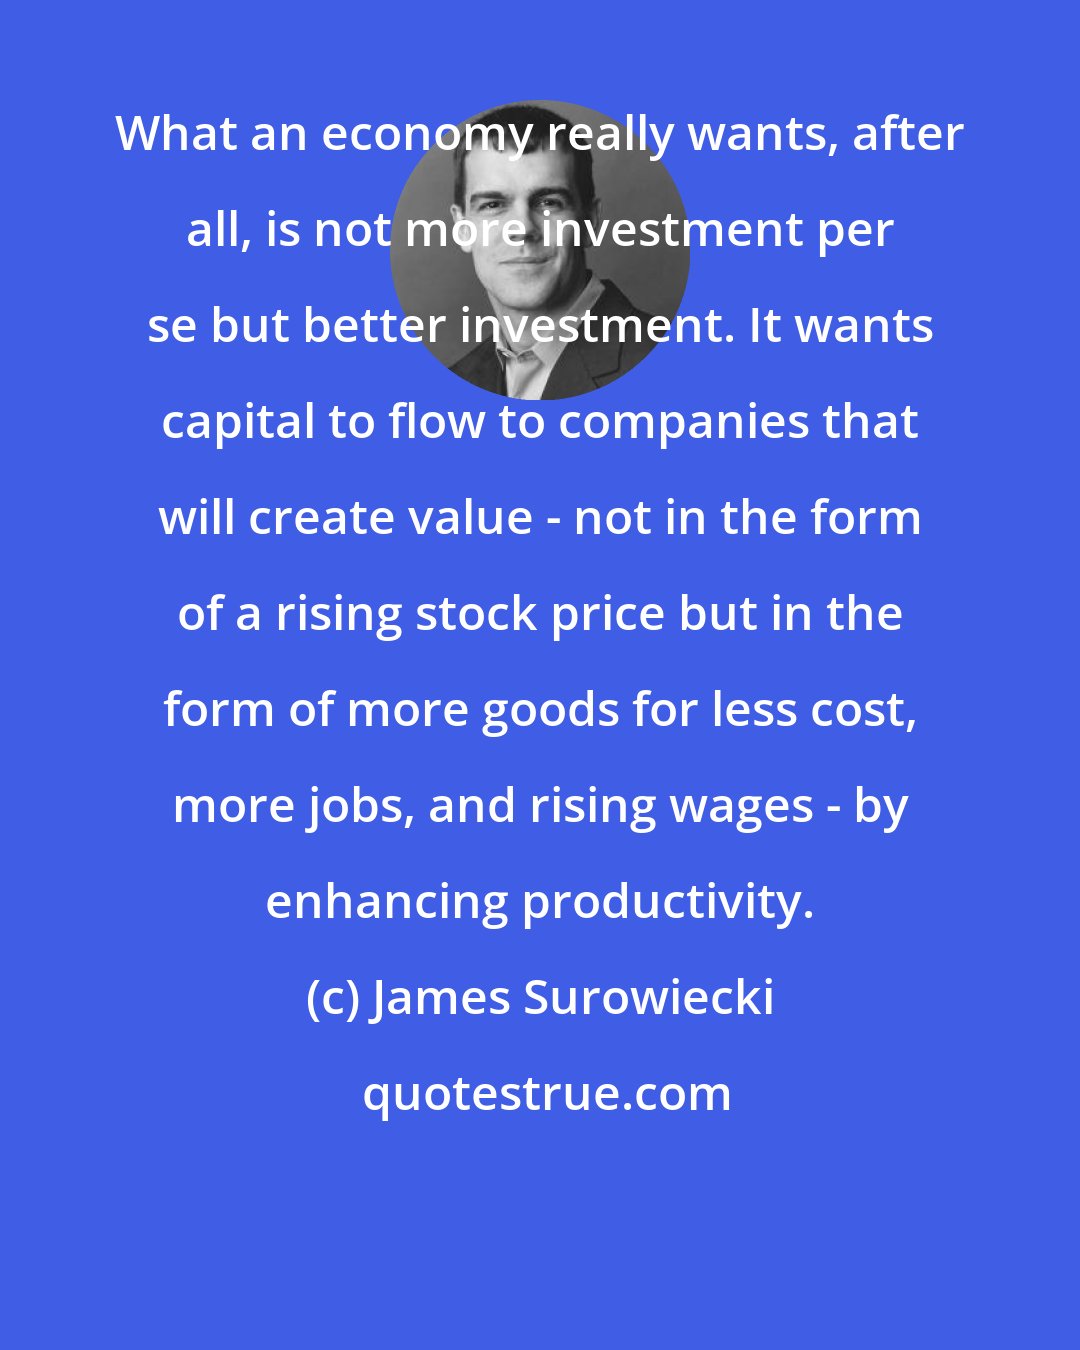 James Surowiecki: What an economy really wants, after all, is not more investment per se but better investment. It wants capital to flow to companies that will create value - not in the form of a rising stock price but in the form of more goods for less cost, more jobs, and rising wages - by enhancing productivity.